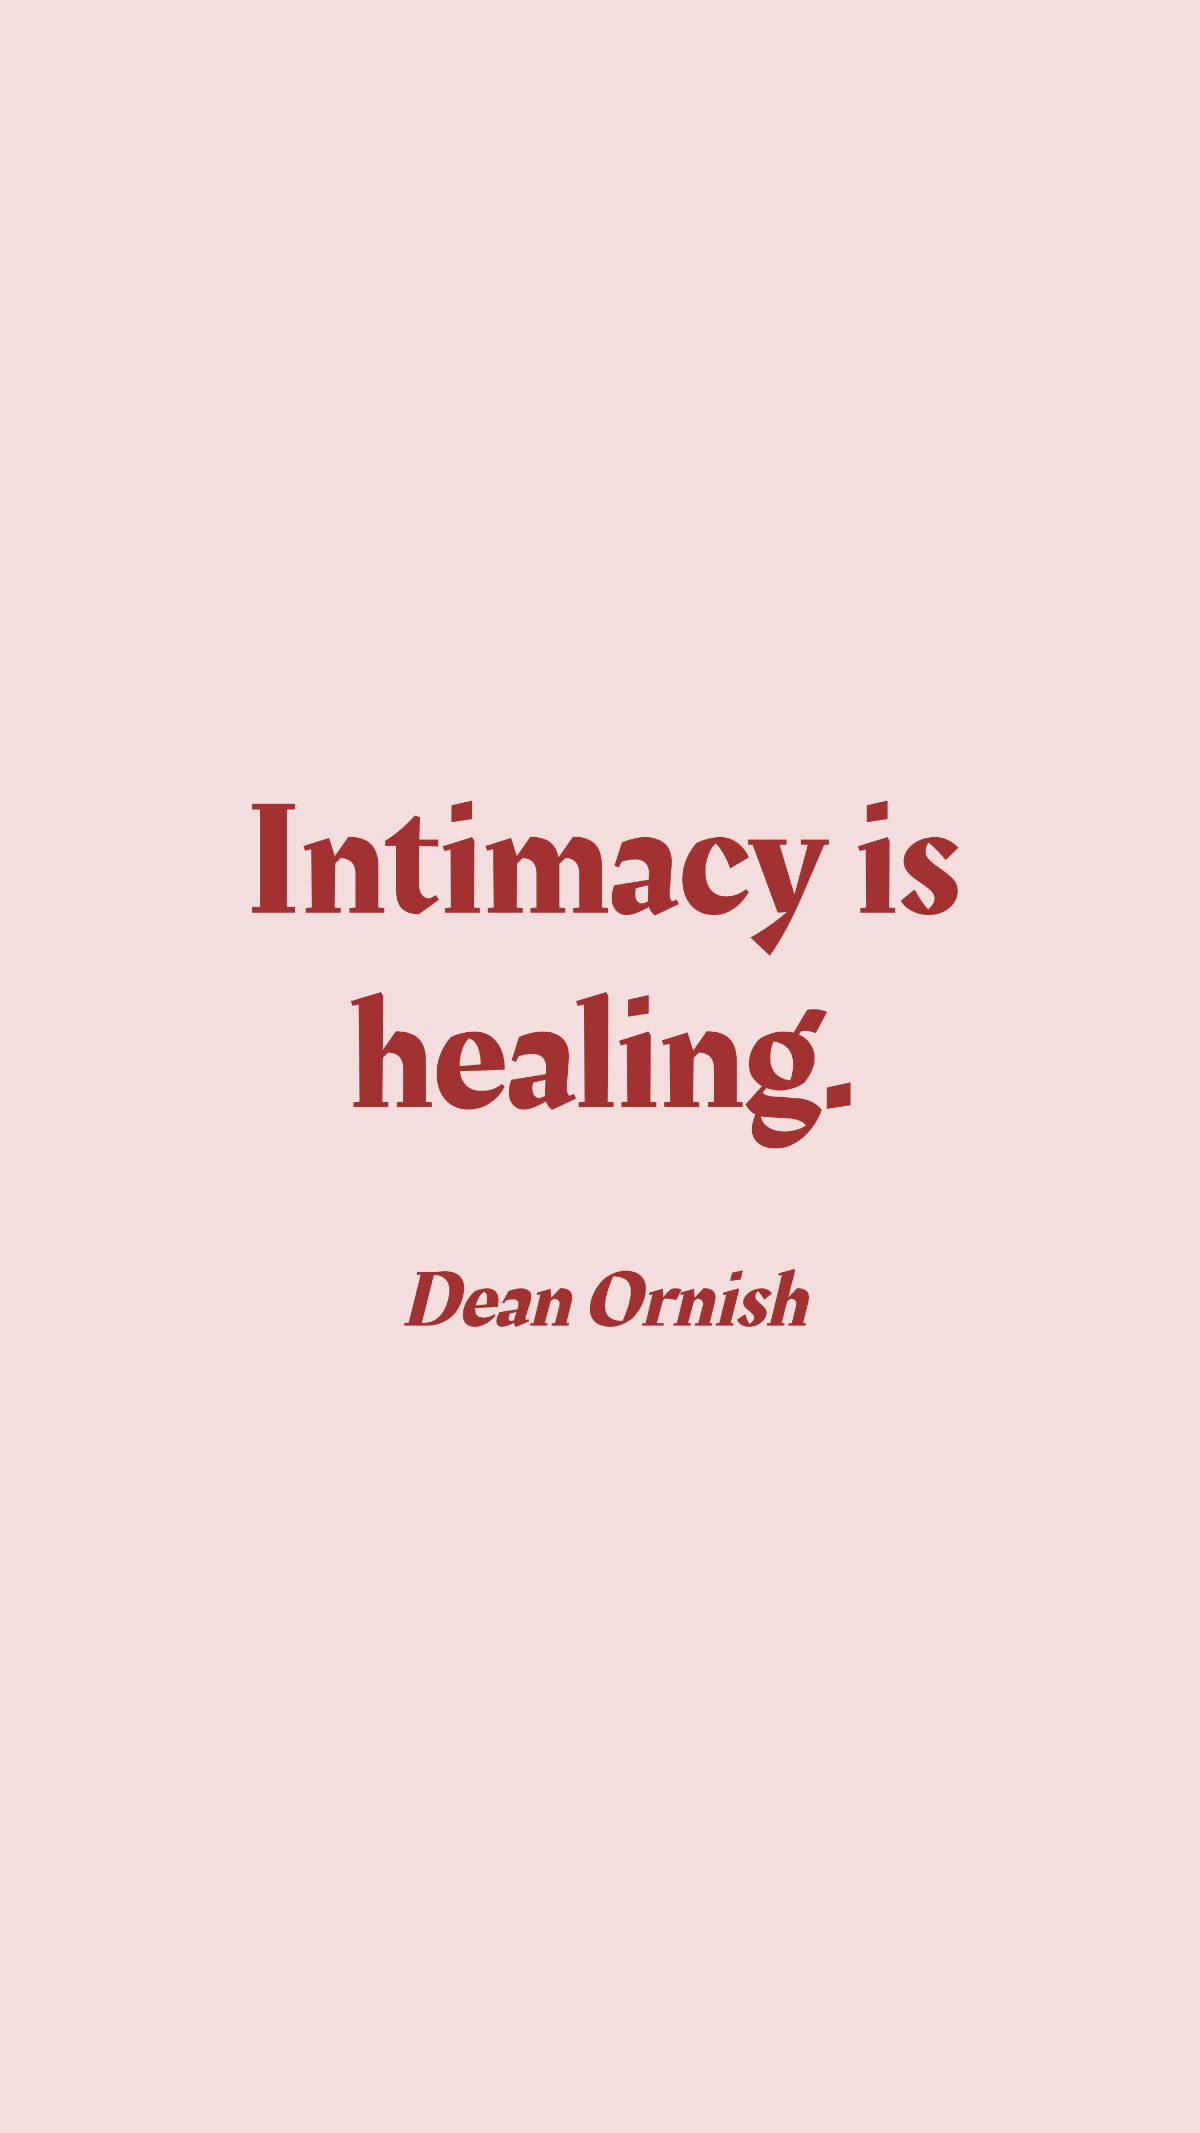 Dean Ornish - Intimacy is healing.